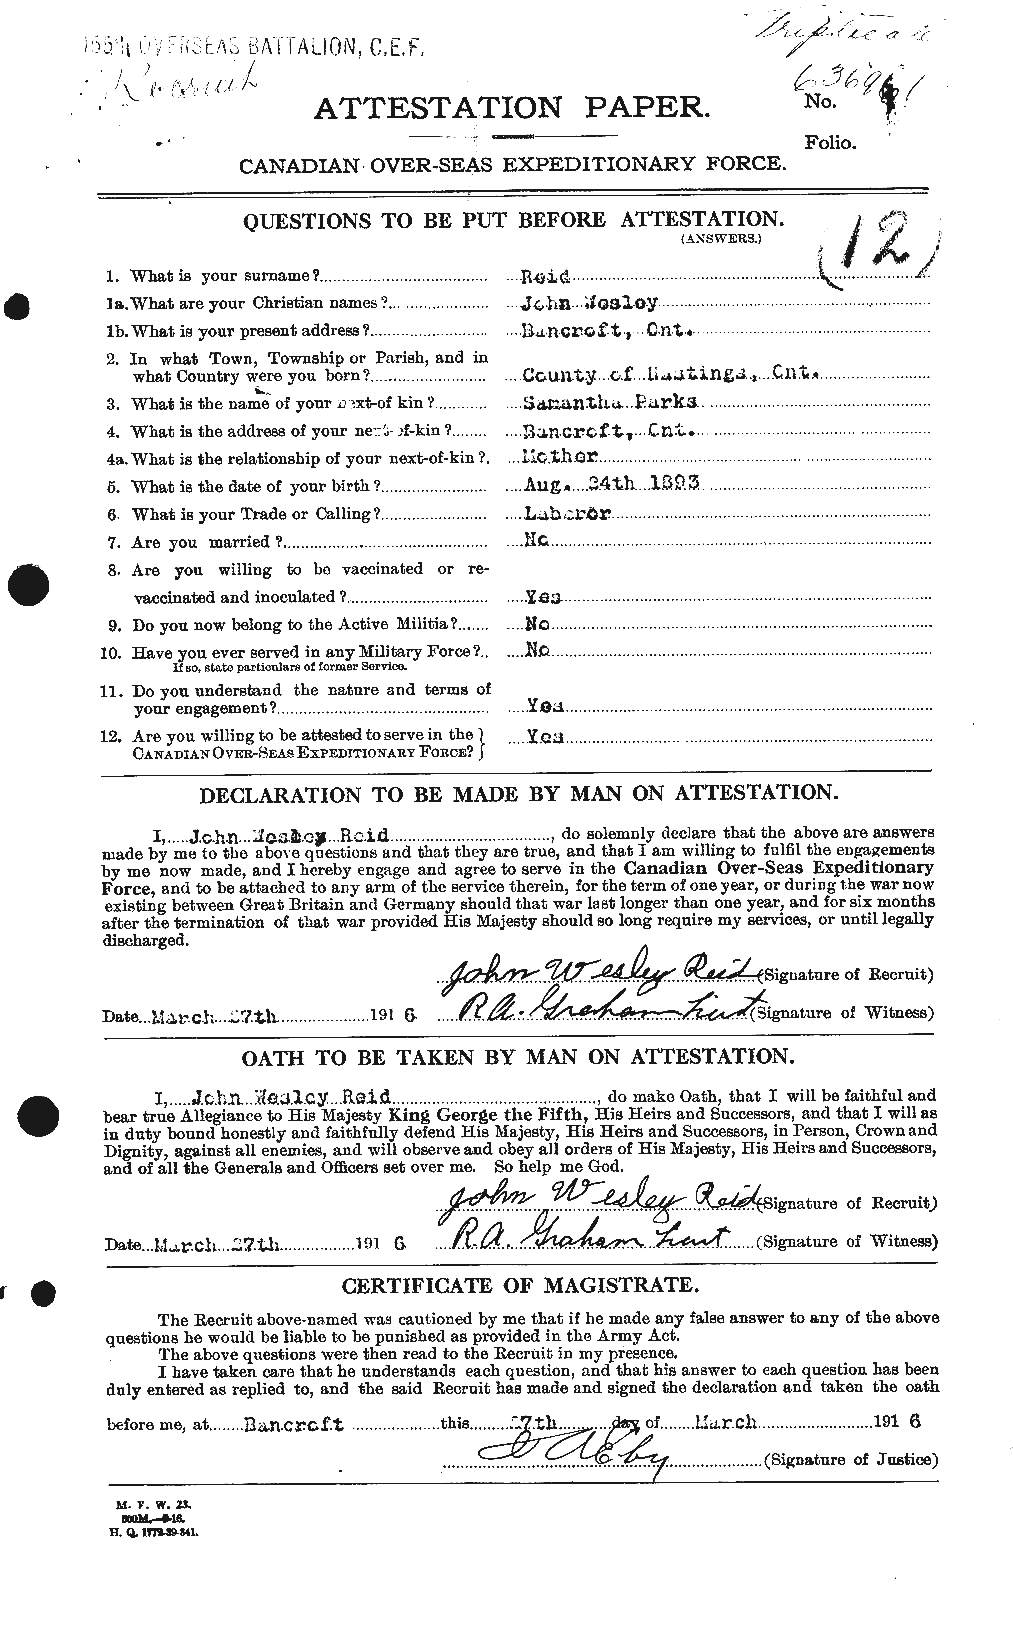 Personnel Records of the First World War - CEF 598880a